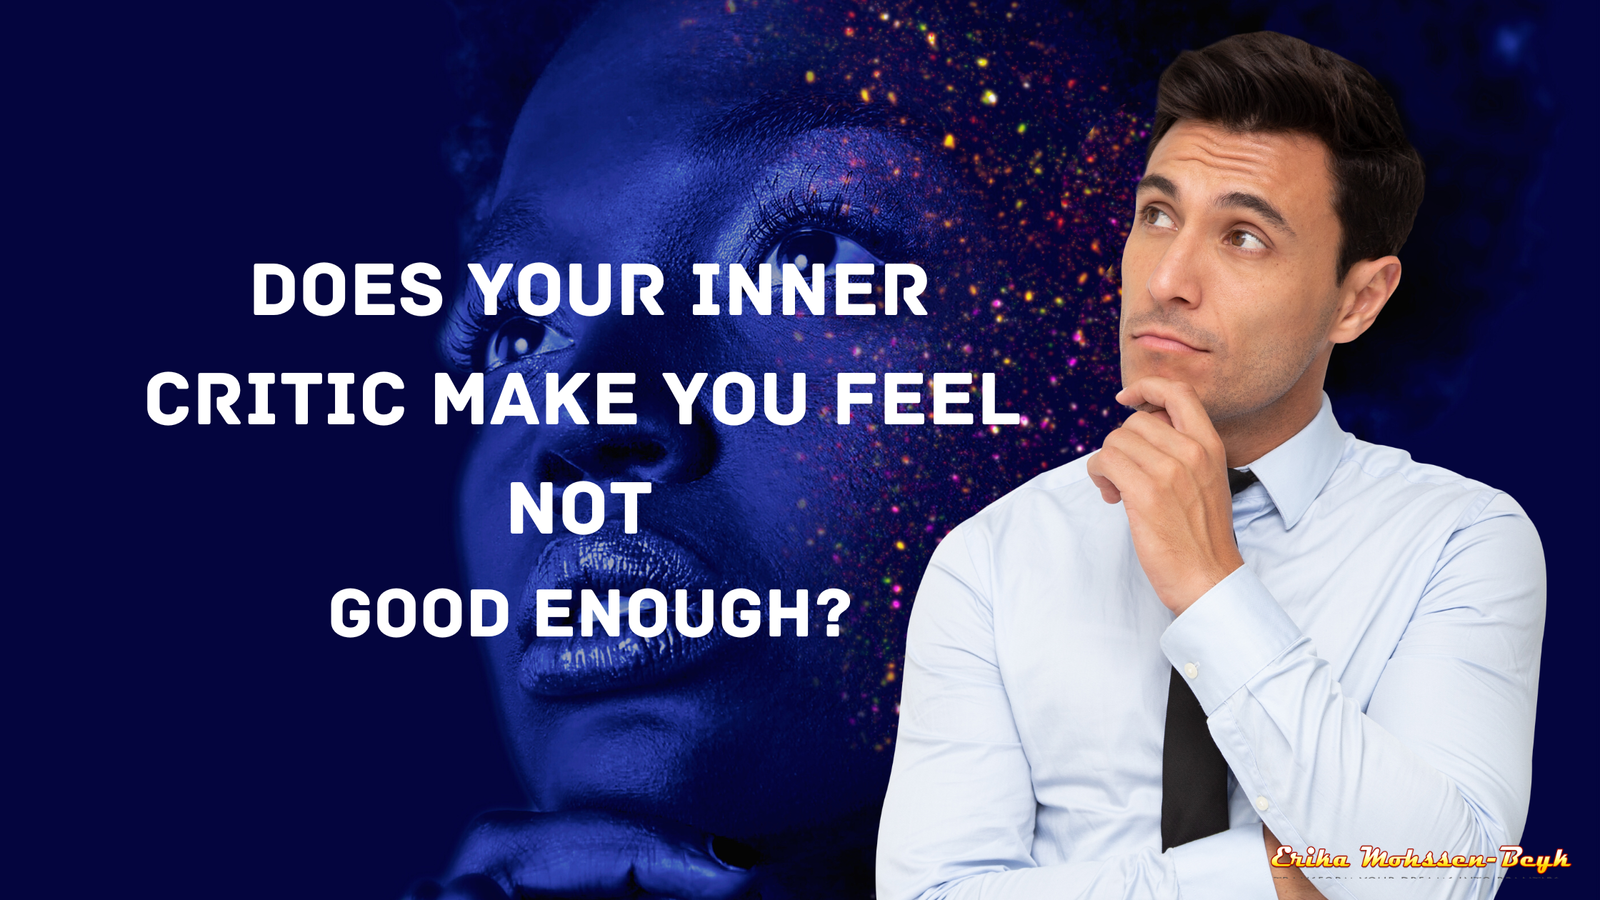 Does your inner critic make you feel not Good Enough?